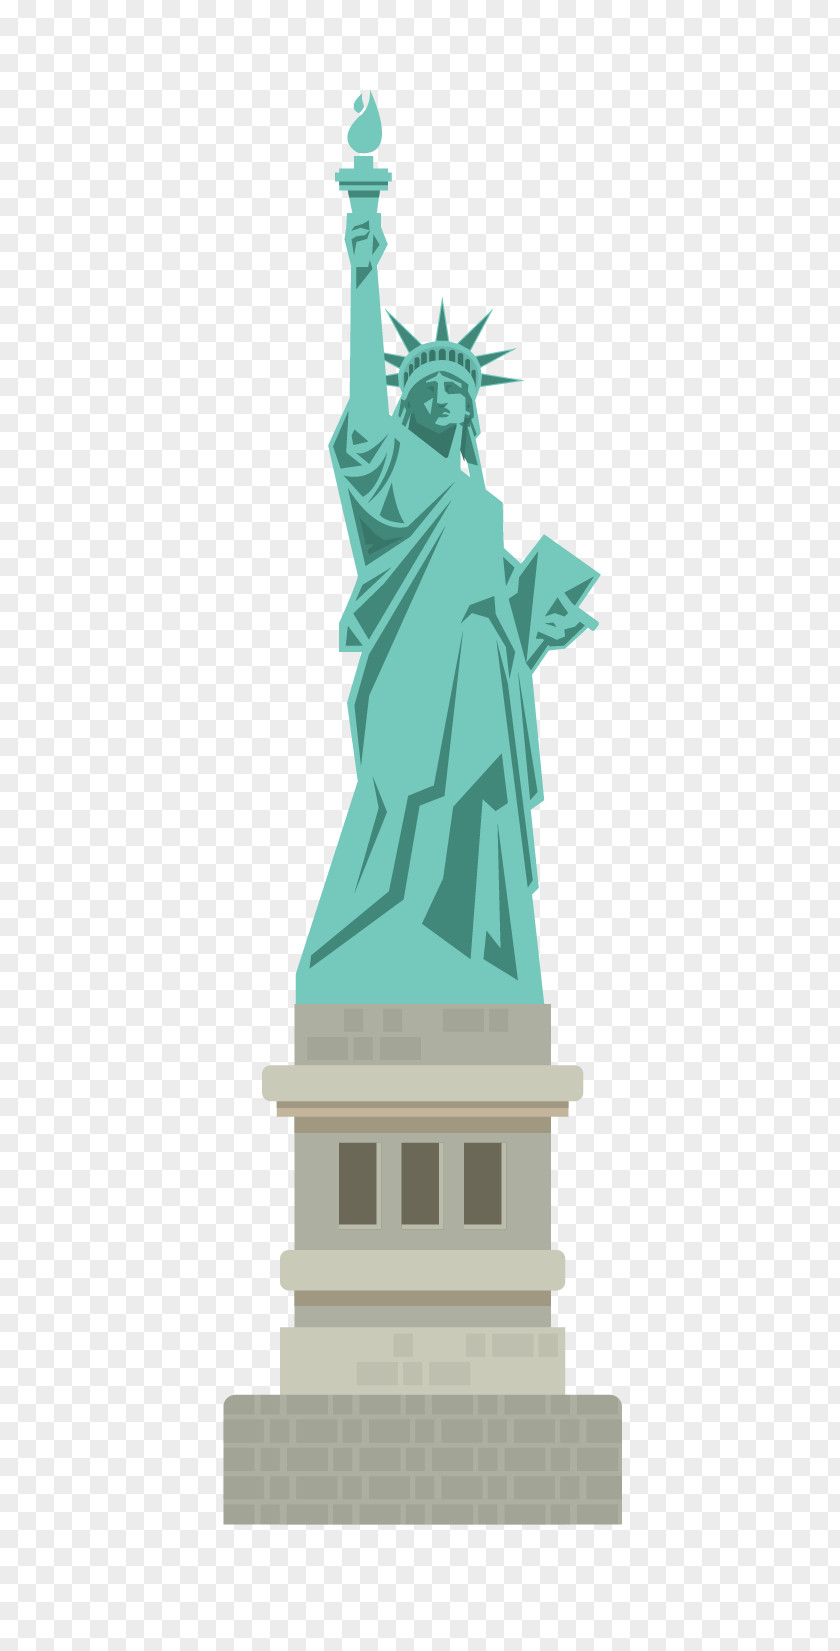 Statue Of Liberty Subscriber Identity Module Prepay Mobile Phone LTE 4G PNG